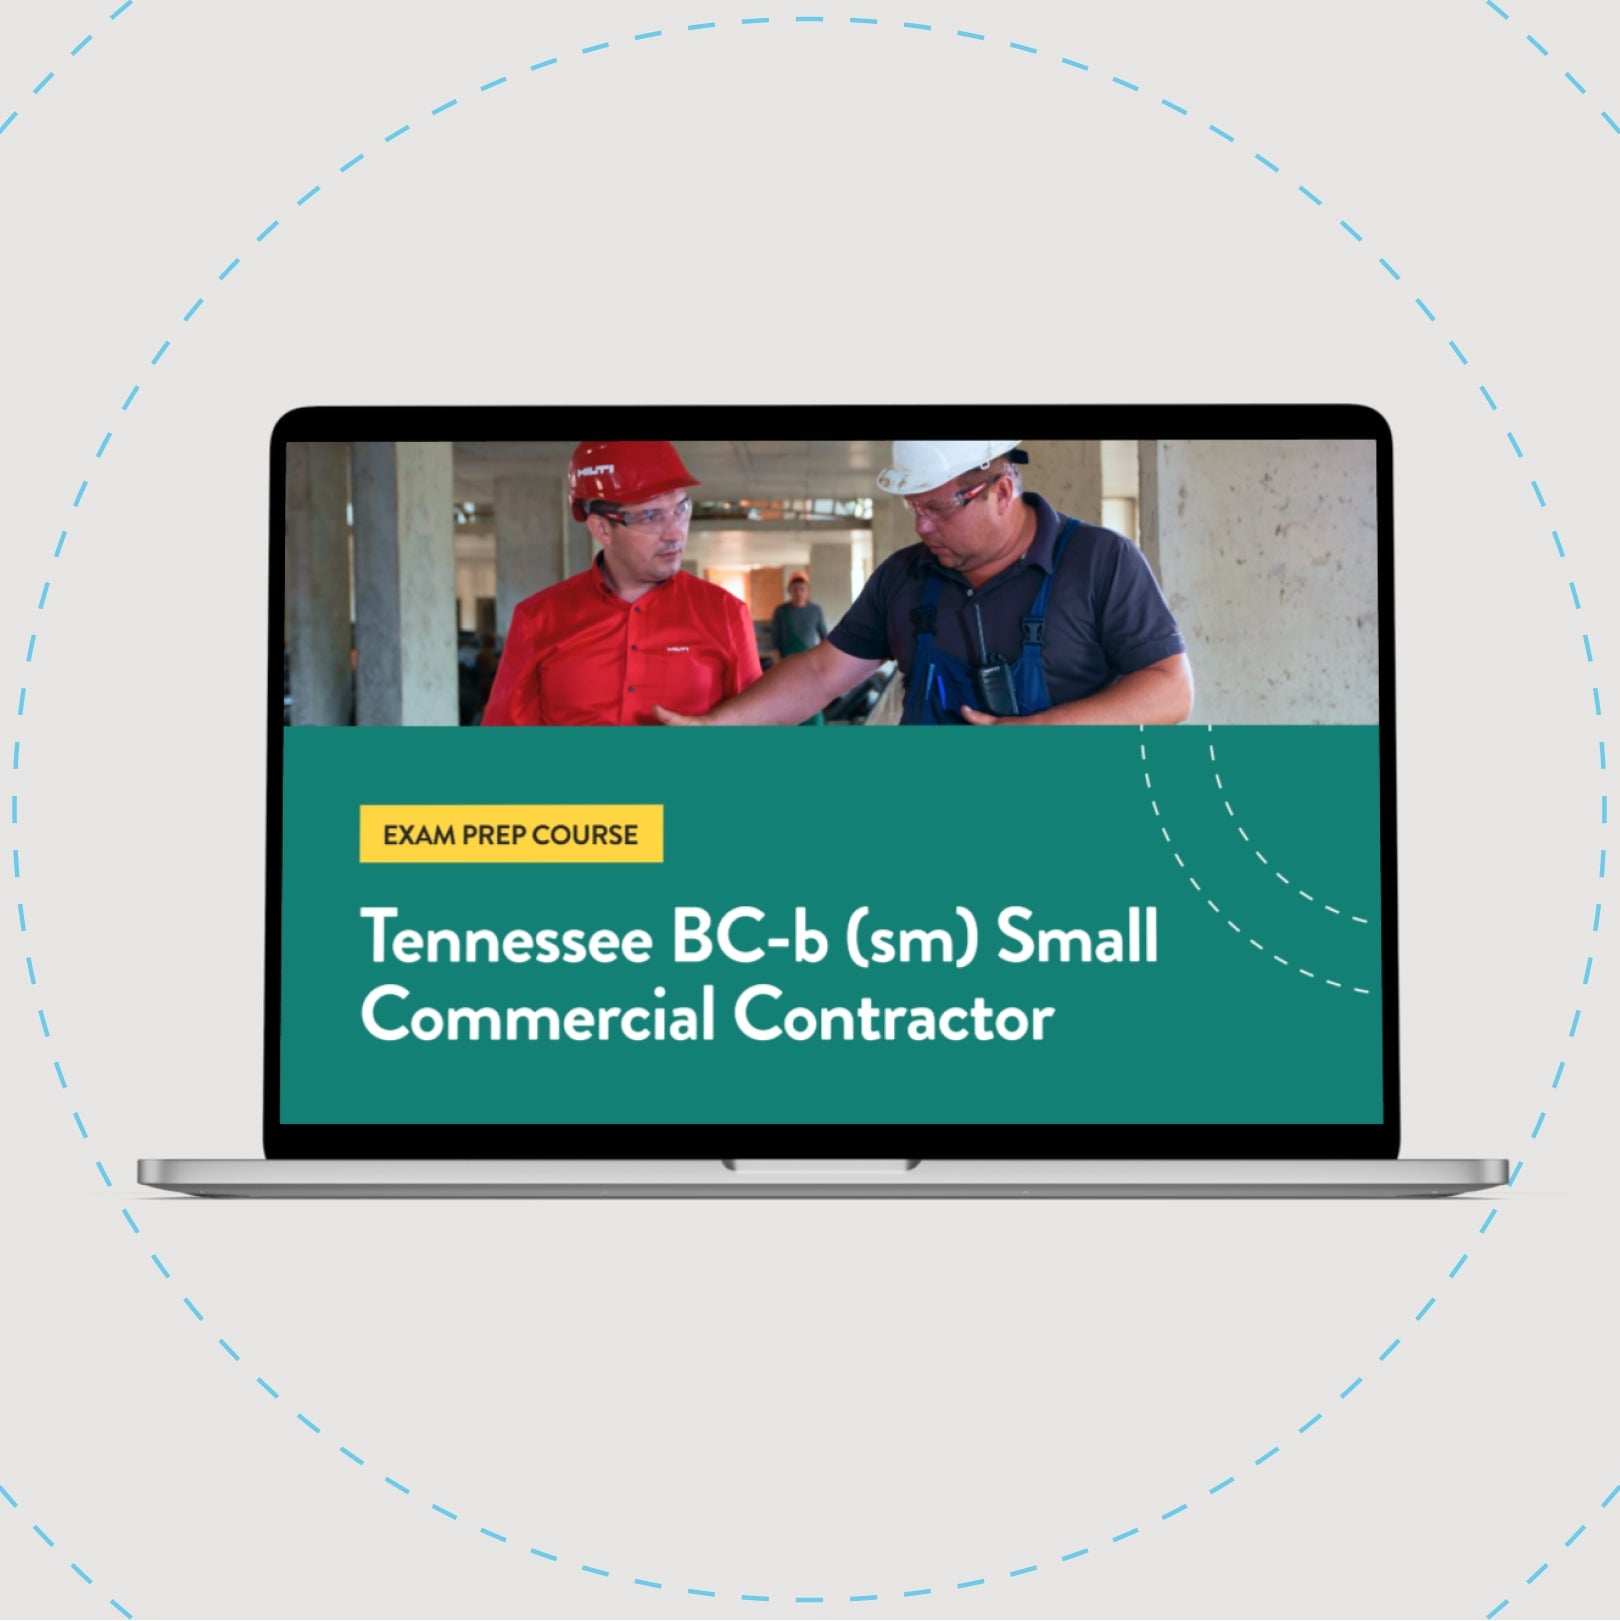 Tennessee BC-b (sm) Small Commercial Contractor Exam Prep Course